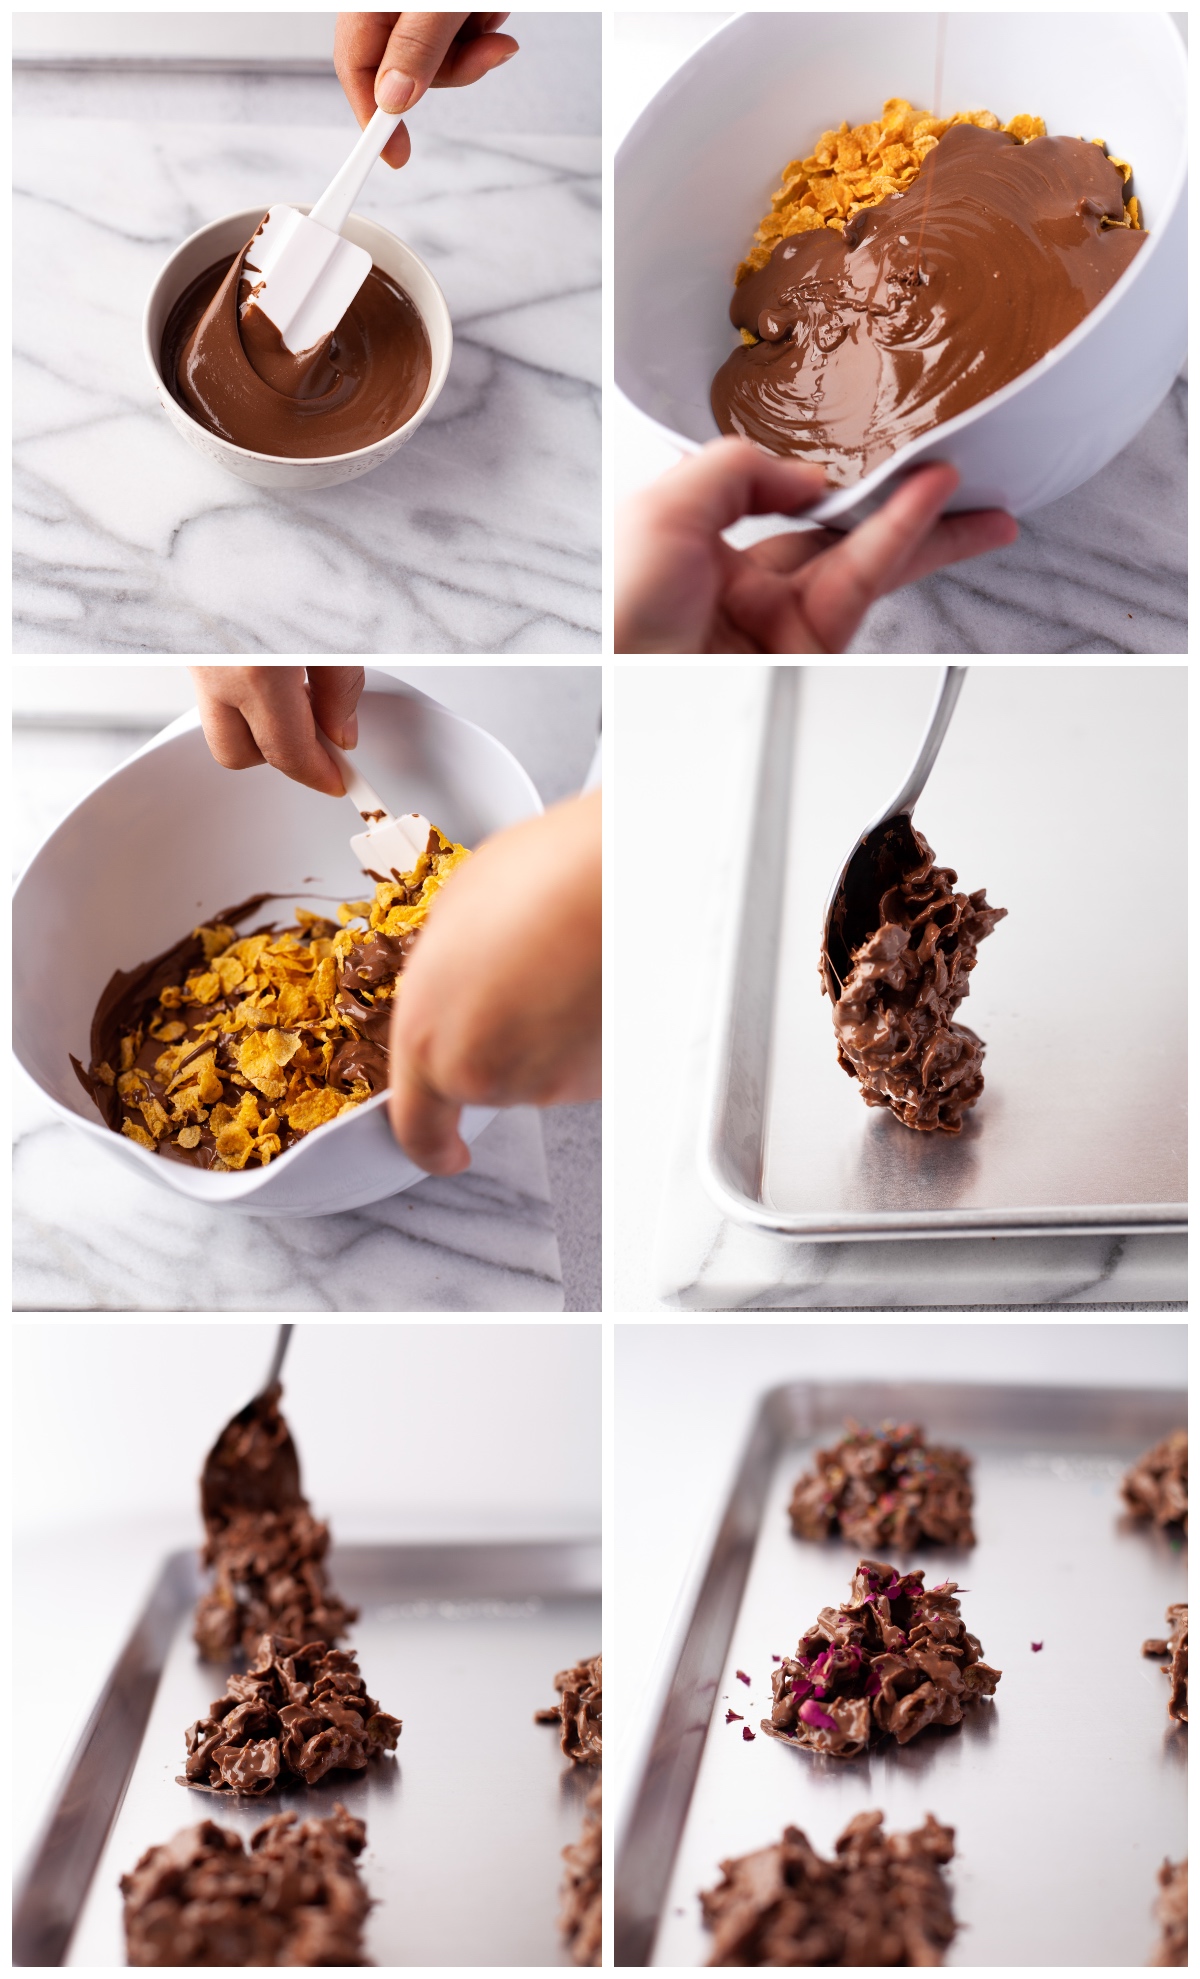 how to make milk chocolate cornflake cookies step by step photo instructions